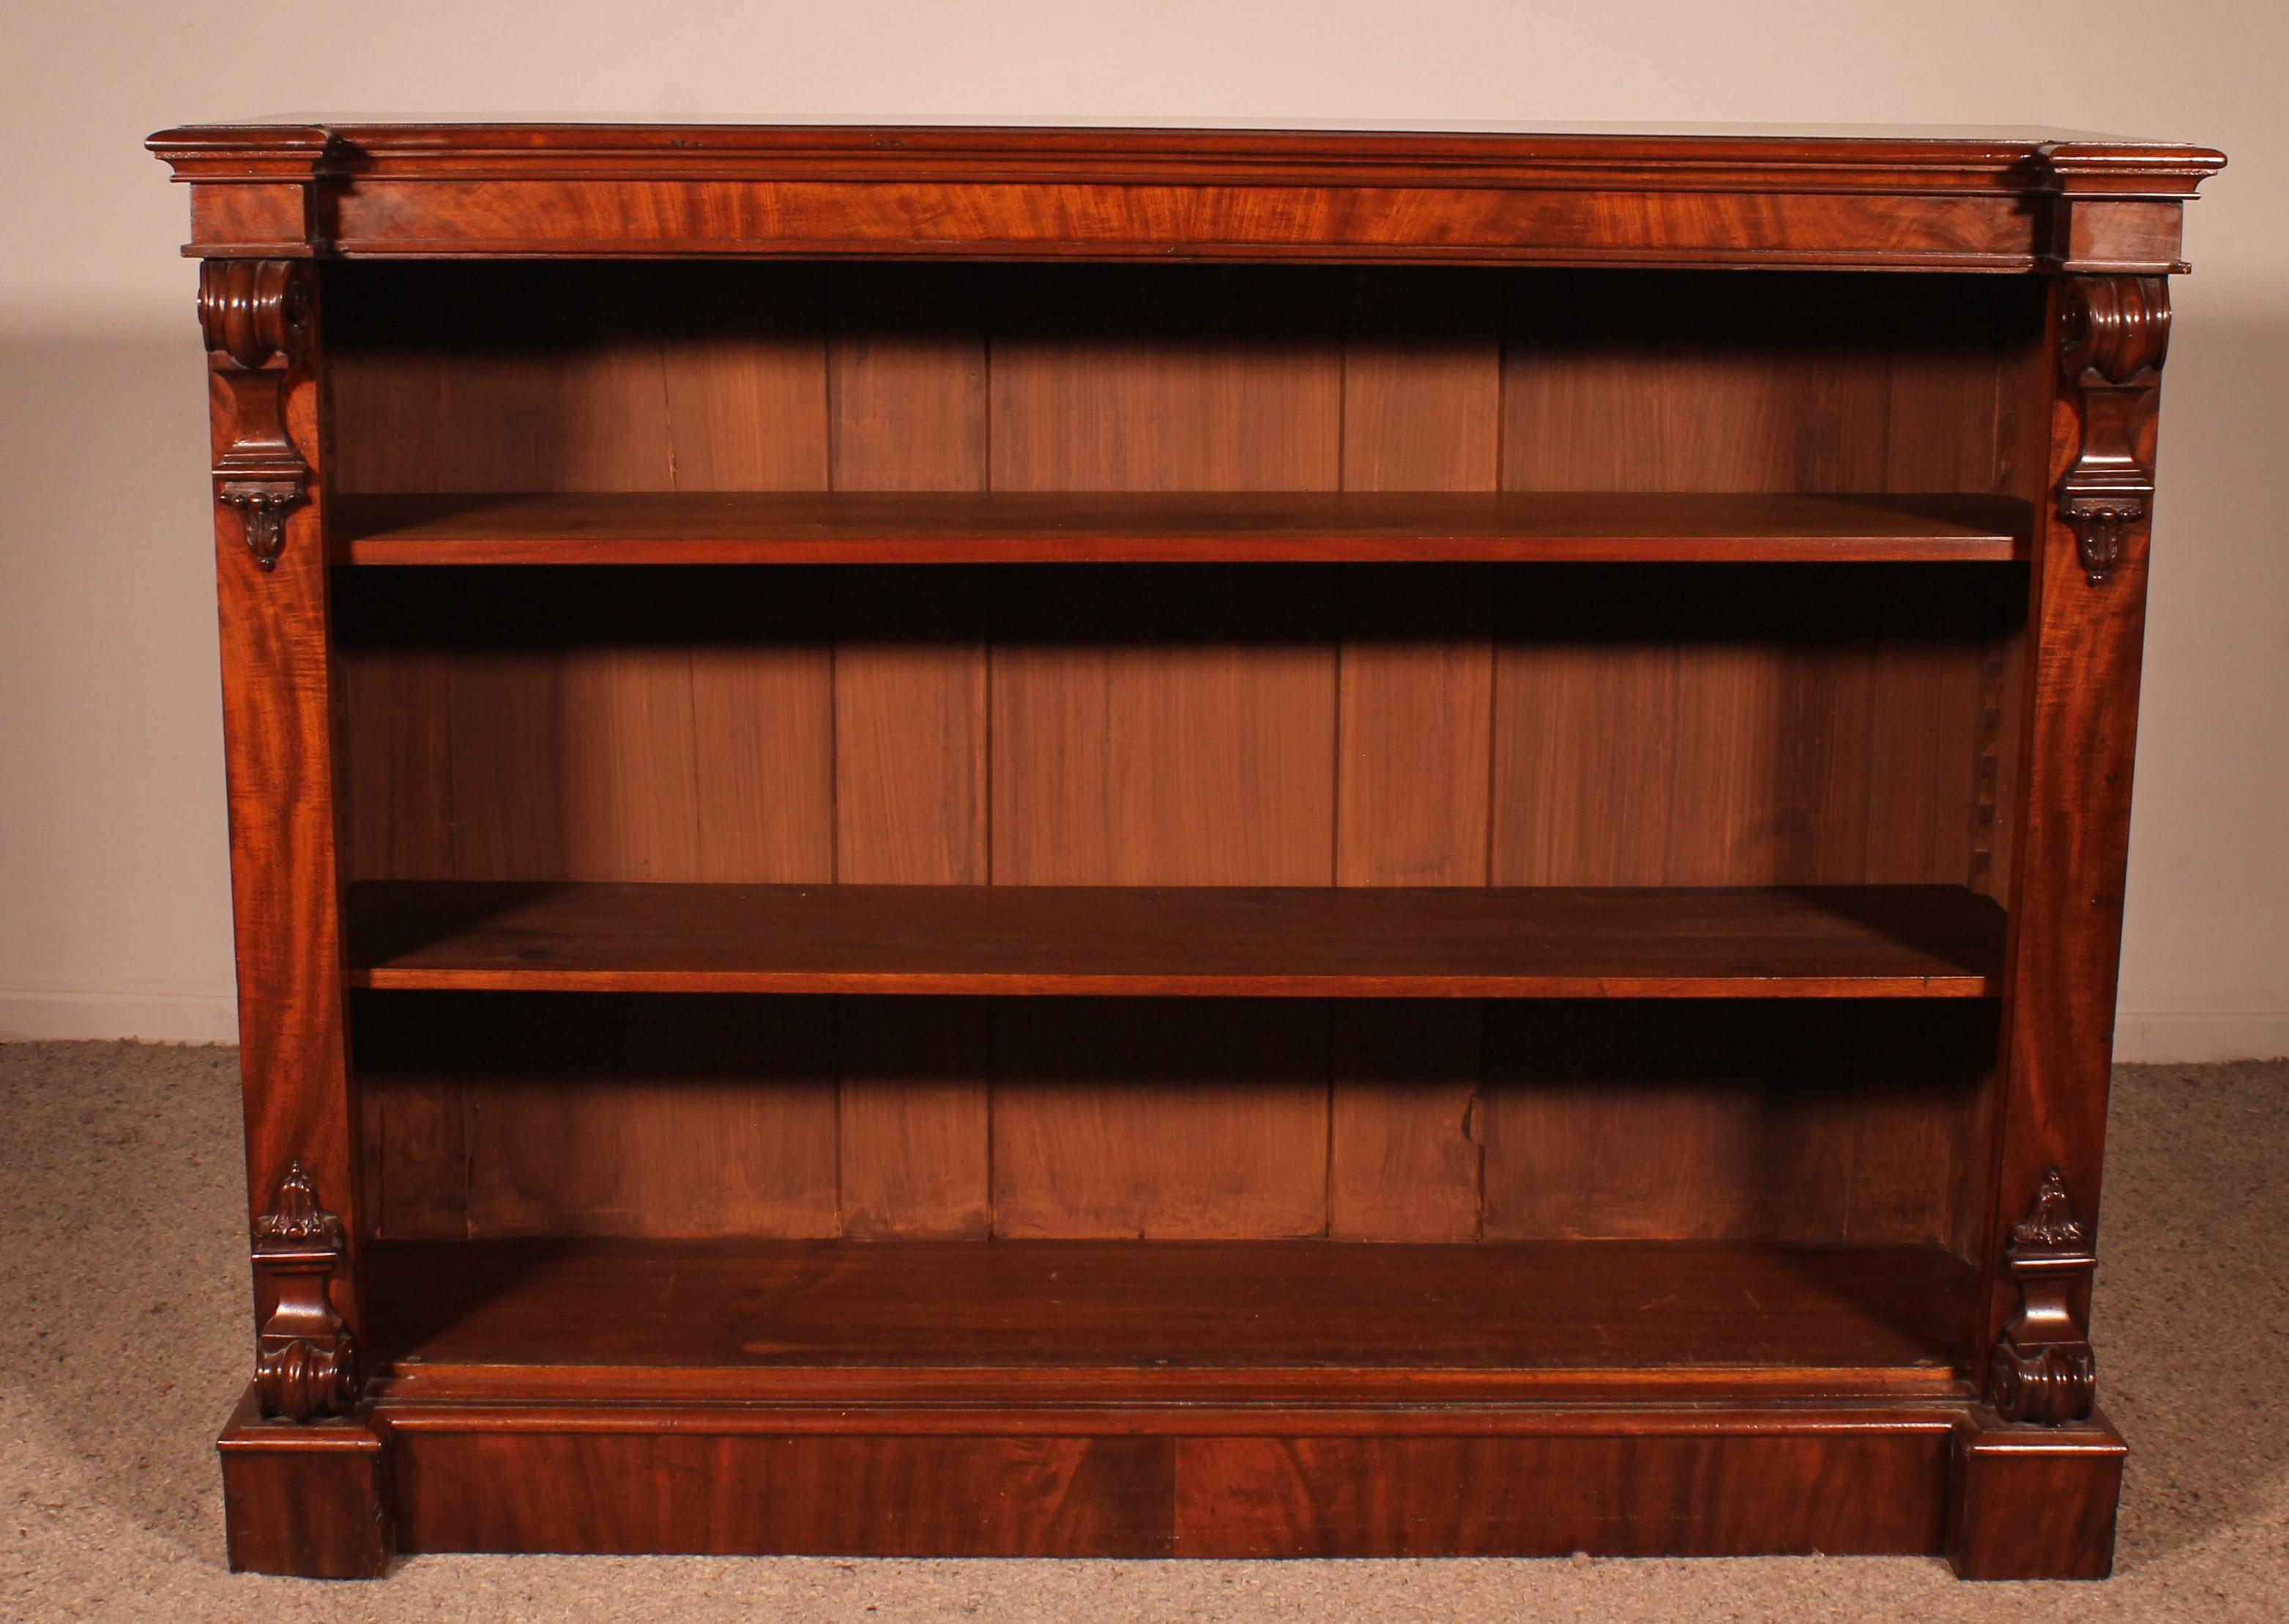 Elegant open bookcase in mahogany from the 19th century from England circa 1850
Beautiful good quality bookcase with mahogany with a beautiful flames and in solid mahogany wich is rare and a sign of good quality
Well proportioned and simple